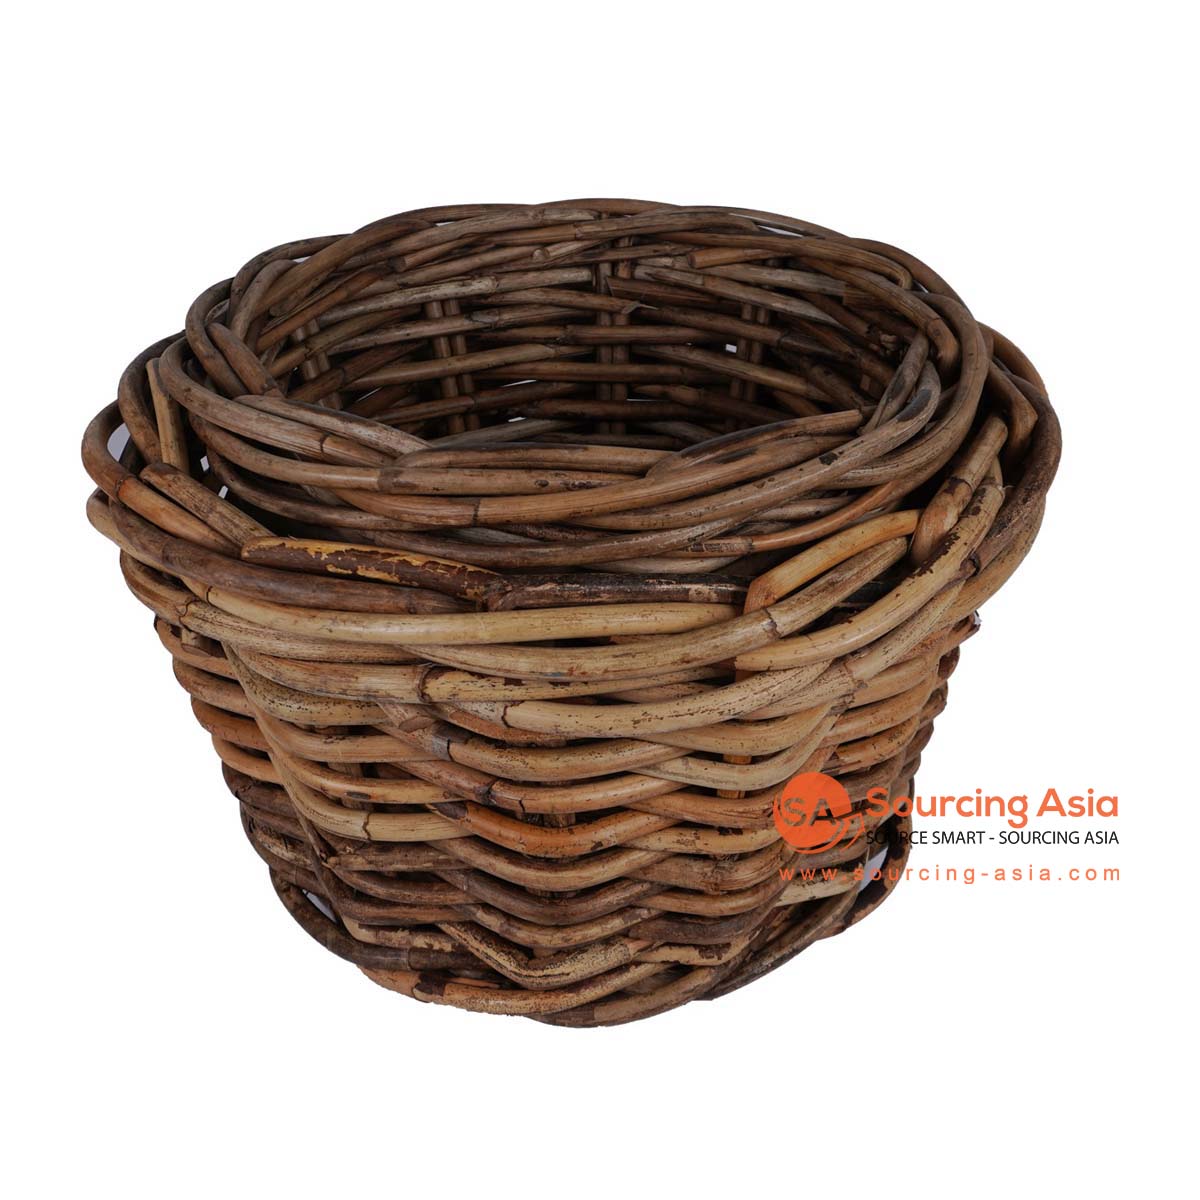 HBSC299 SET OF TWO NATURAL RATTAN SMALL BASKETS